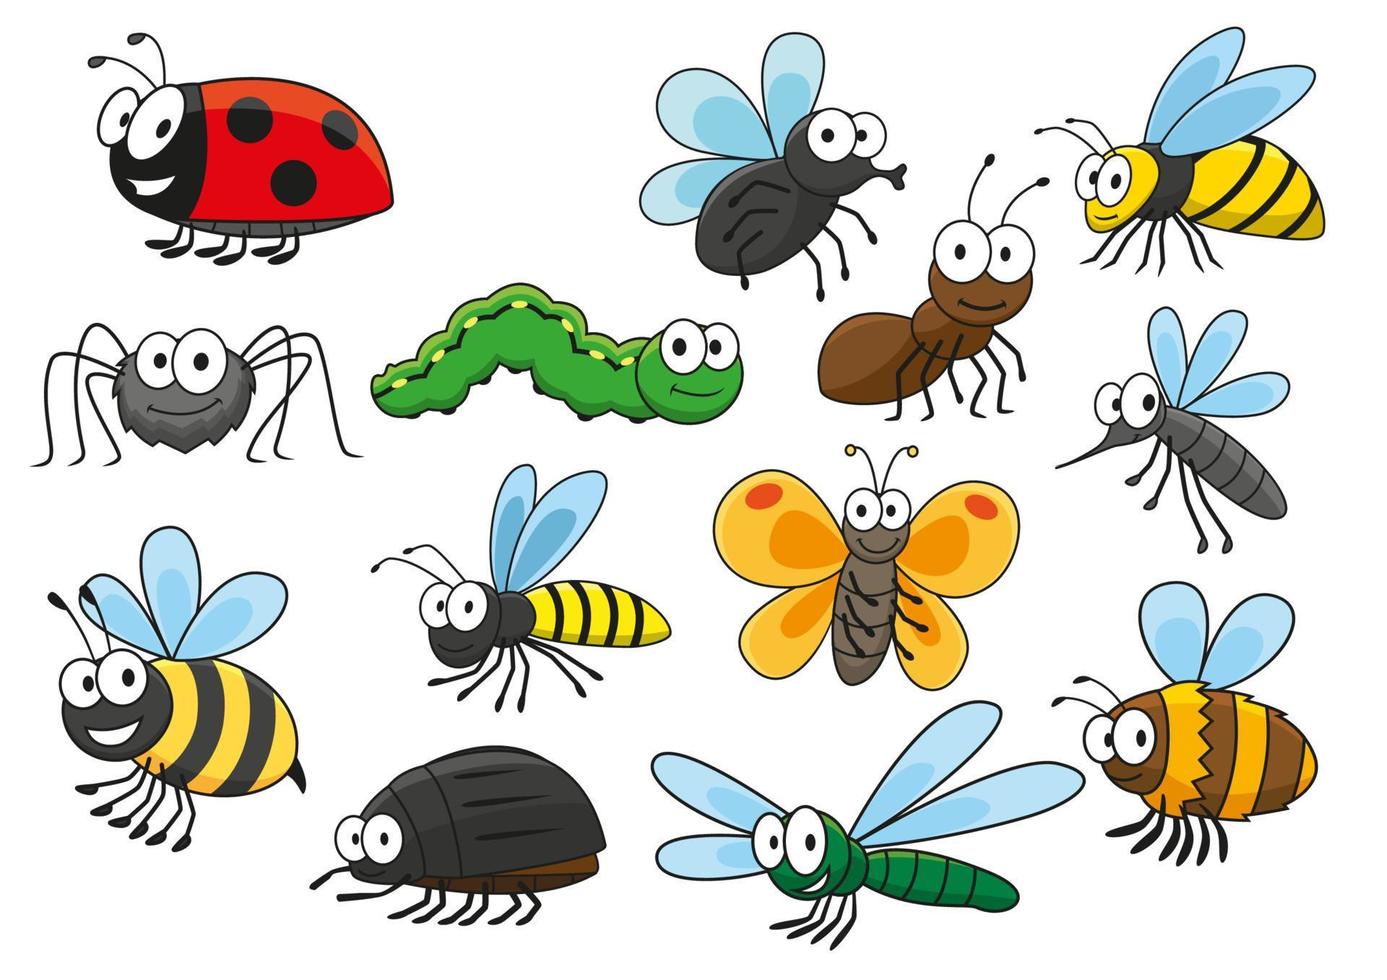 Colorful cartoon smiling insects characters vector